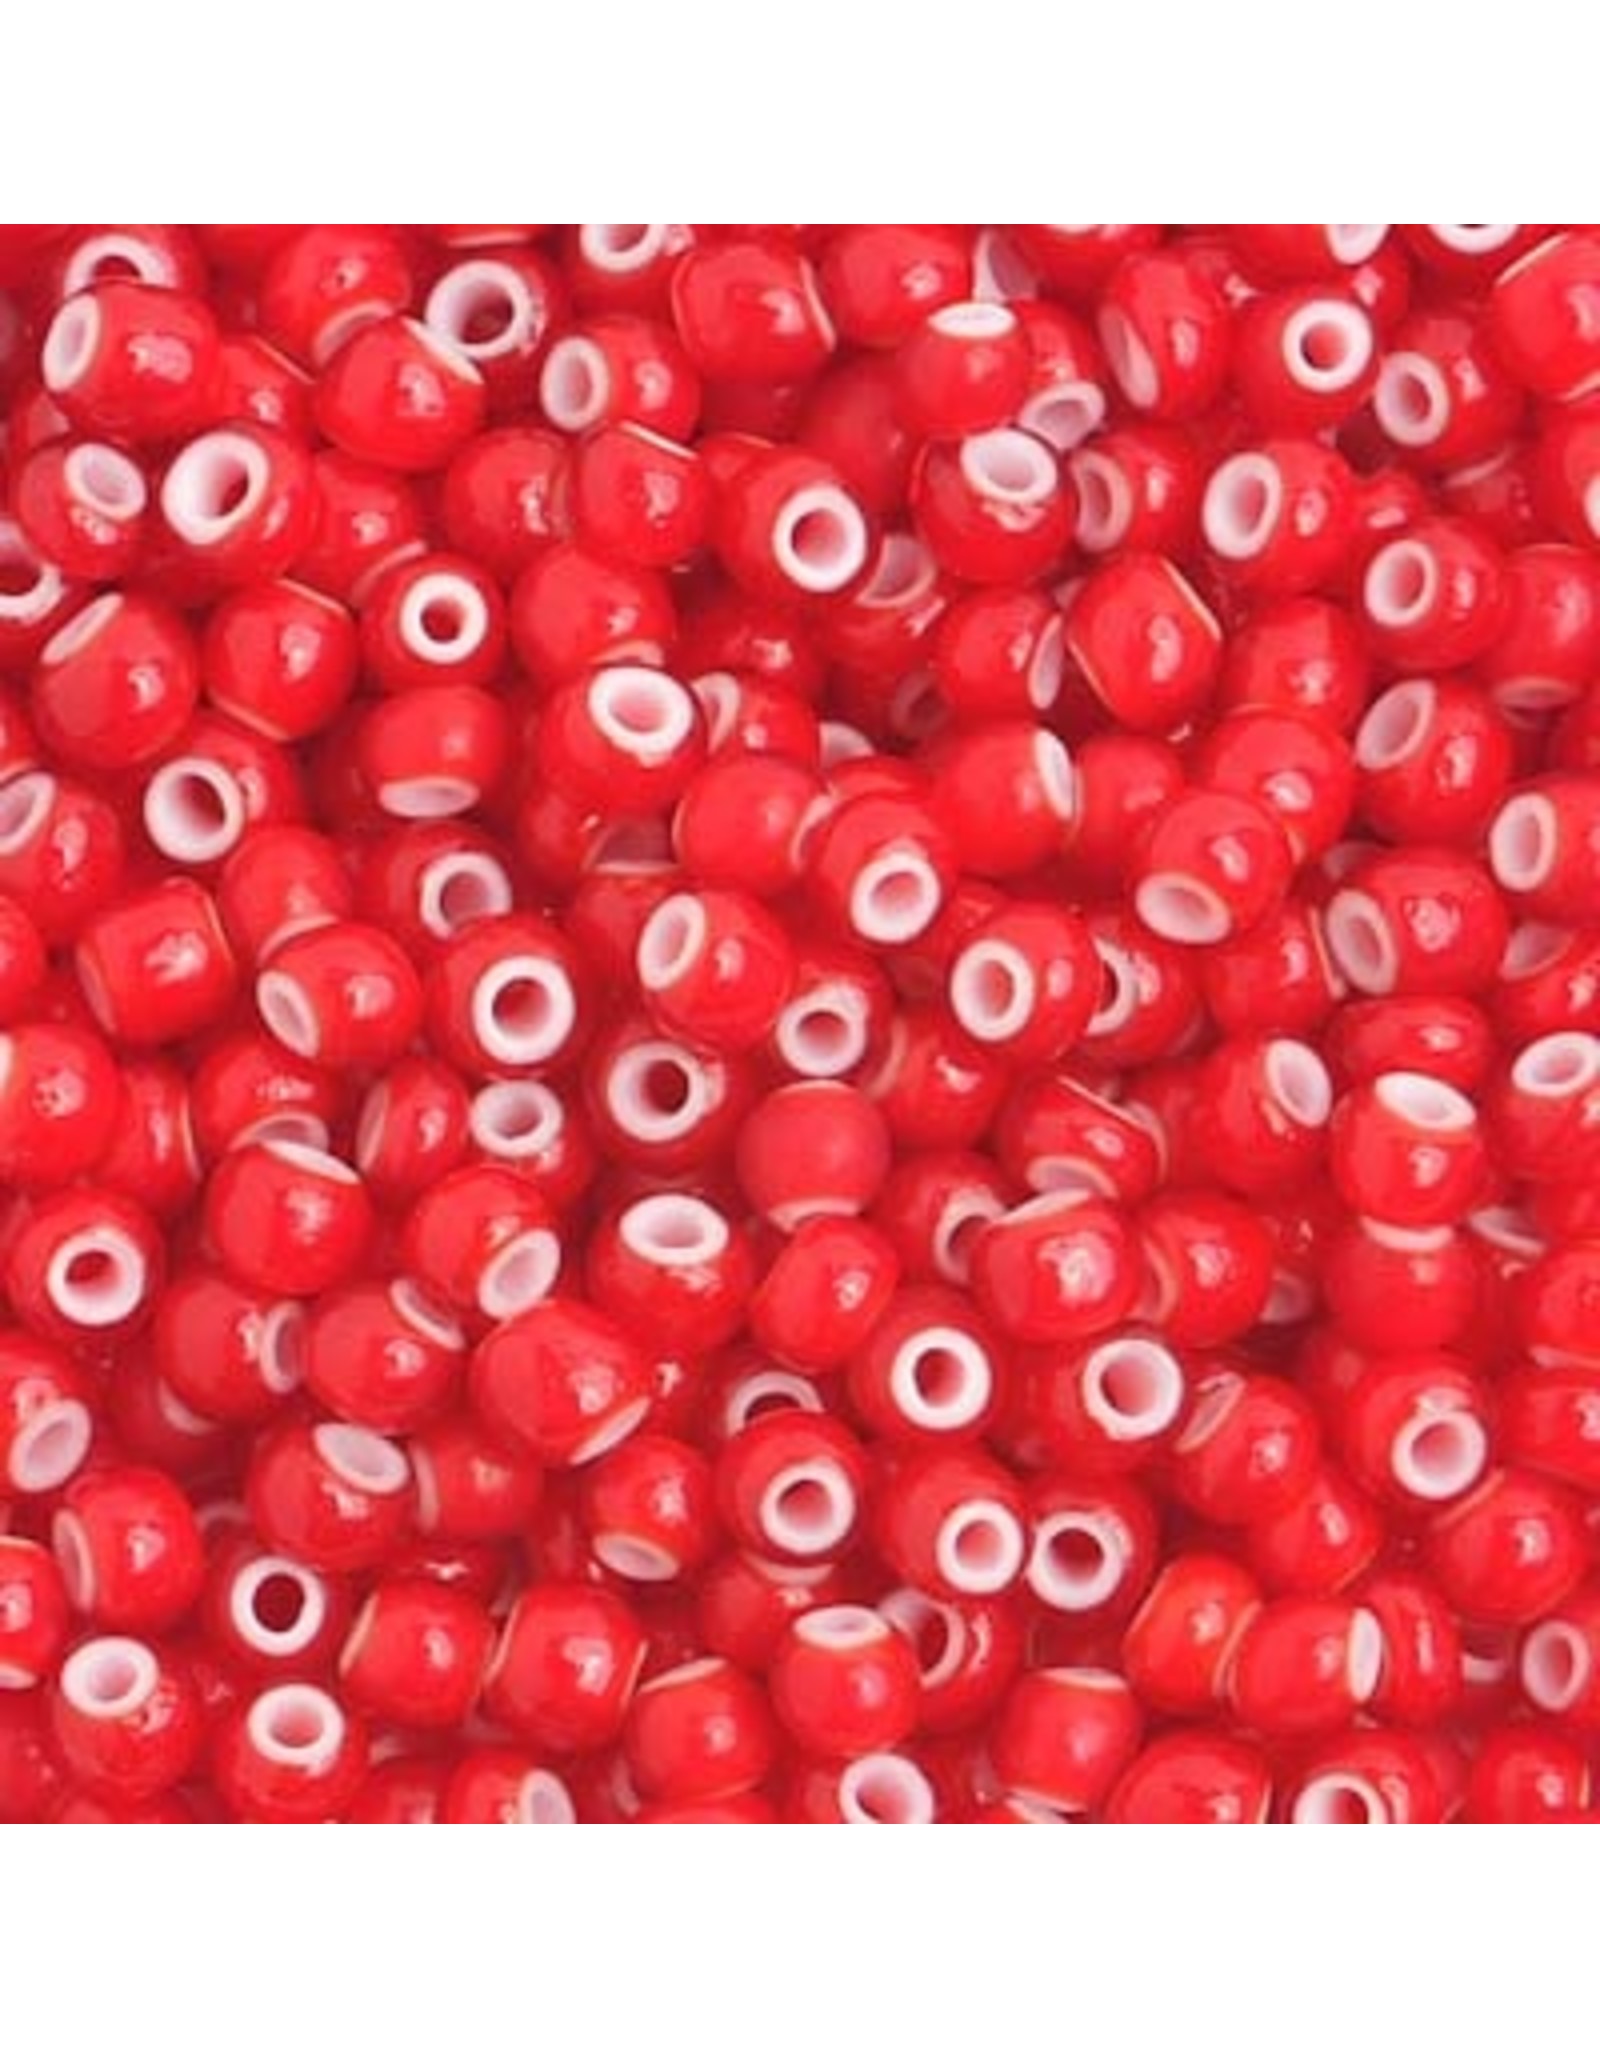 Czech *401441B  6  Seed 125g  Red White Hearts